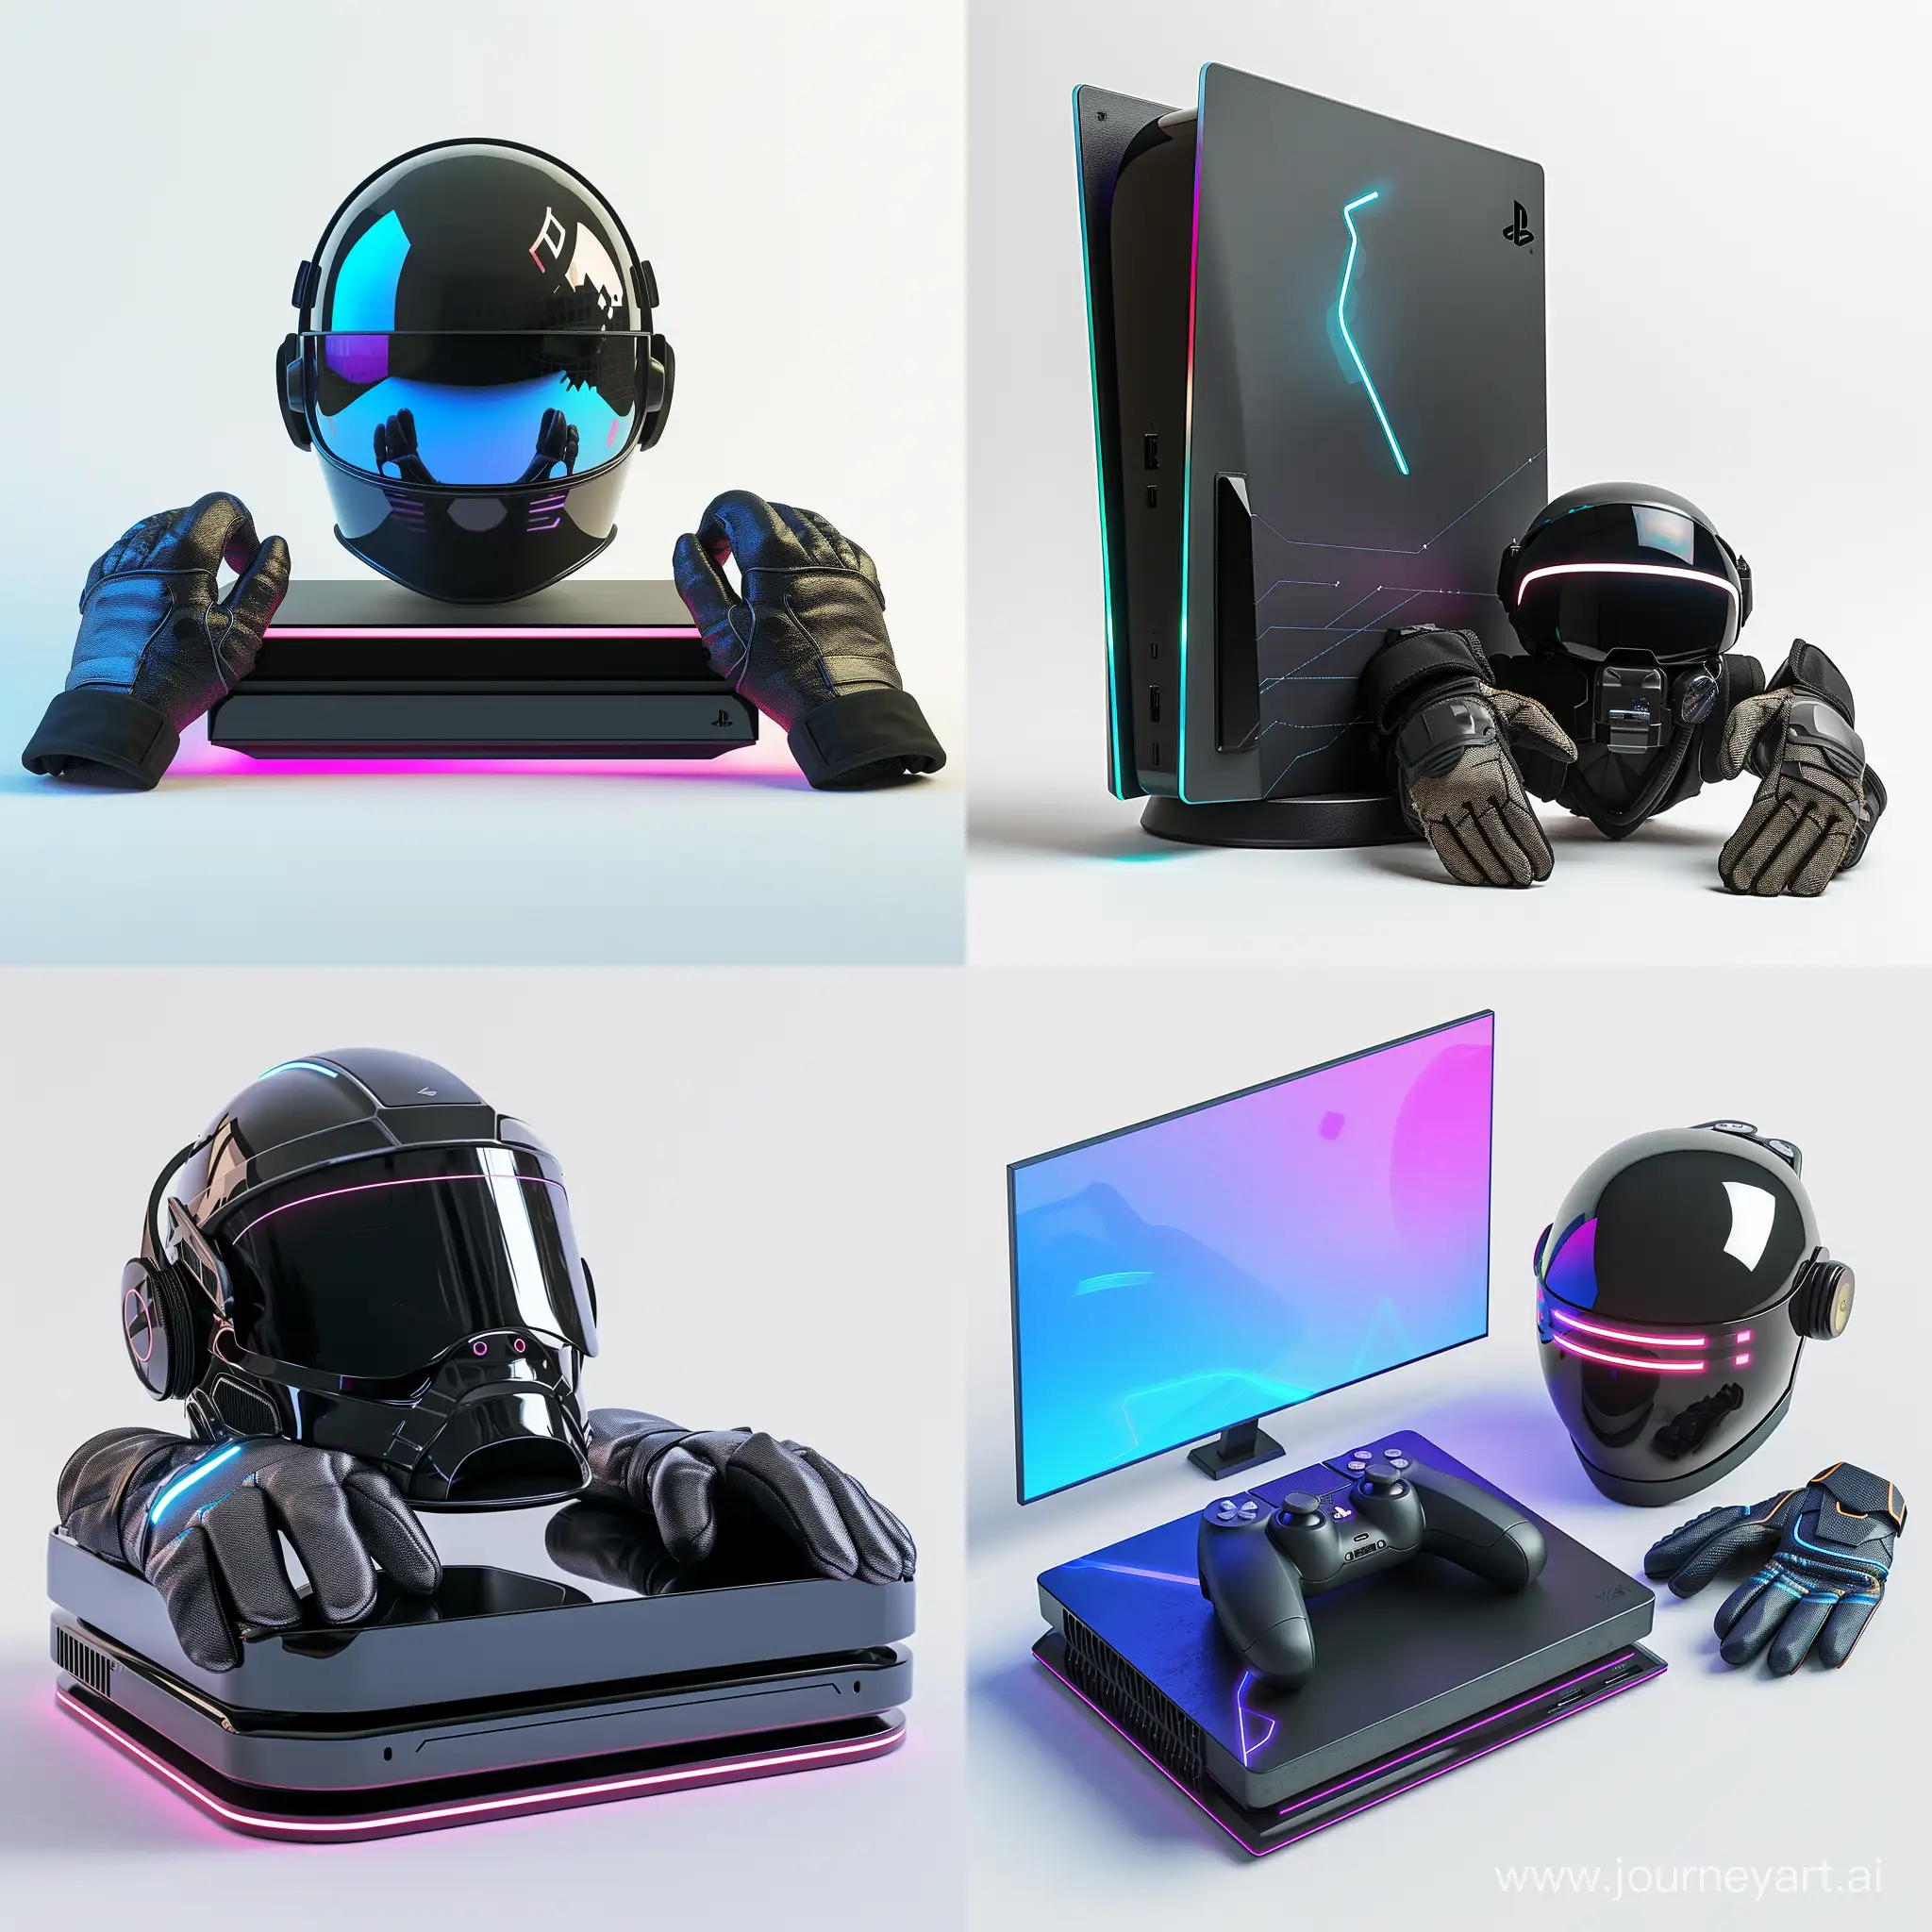 Futuristic-Gaming-Experience-Virtual-Reality-Console-with-Gloves-and-Helmet